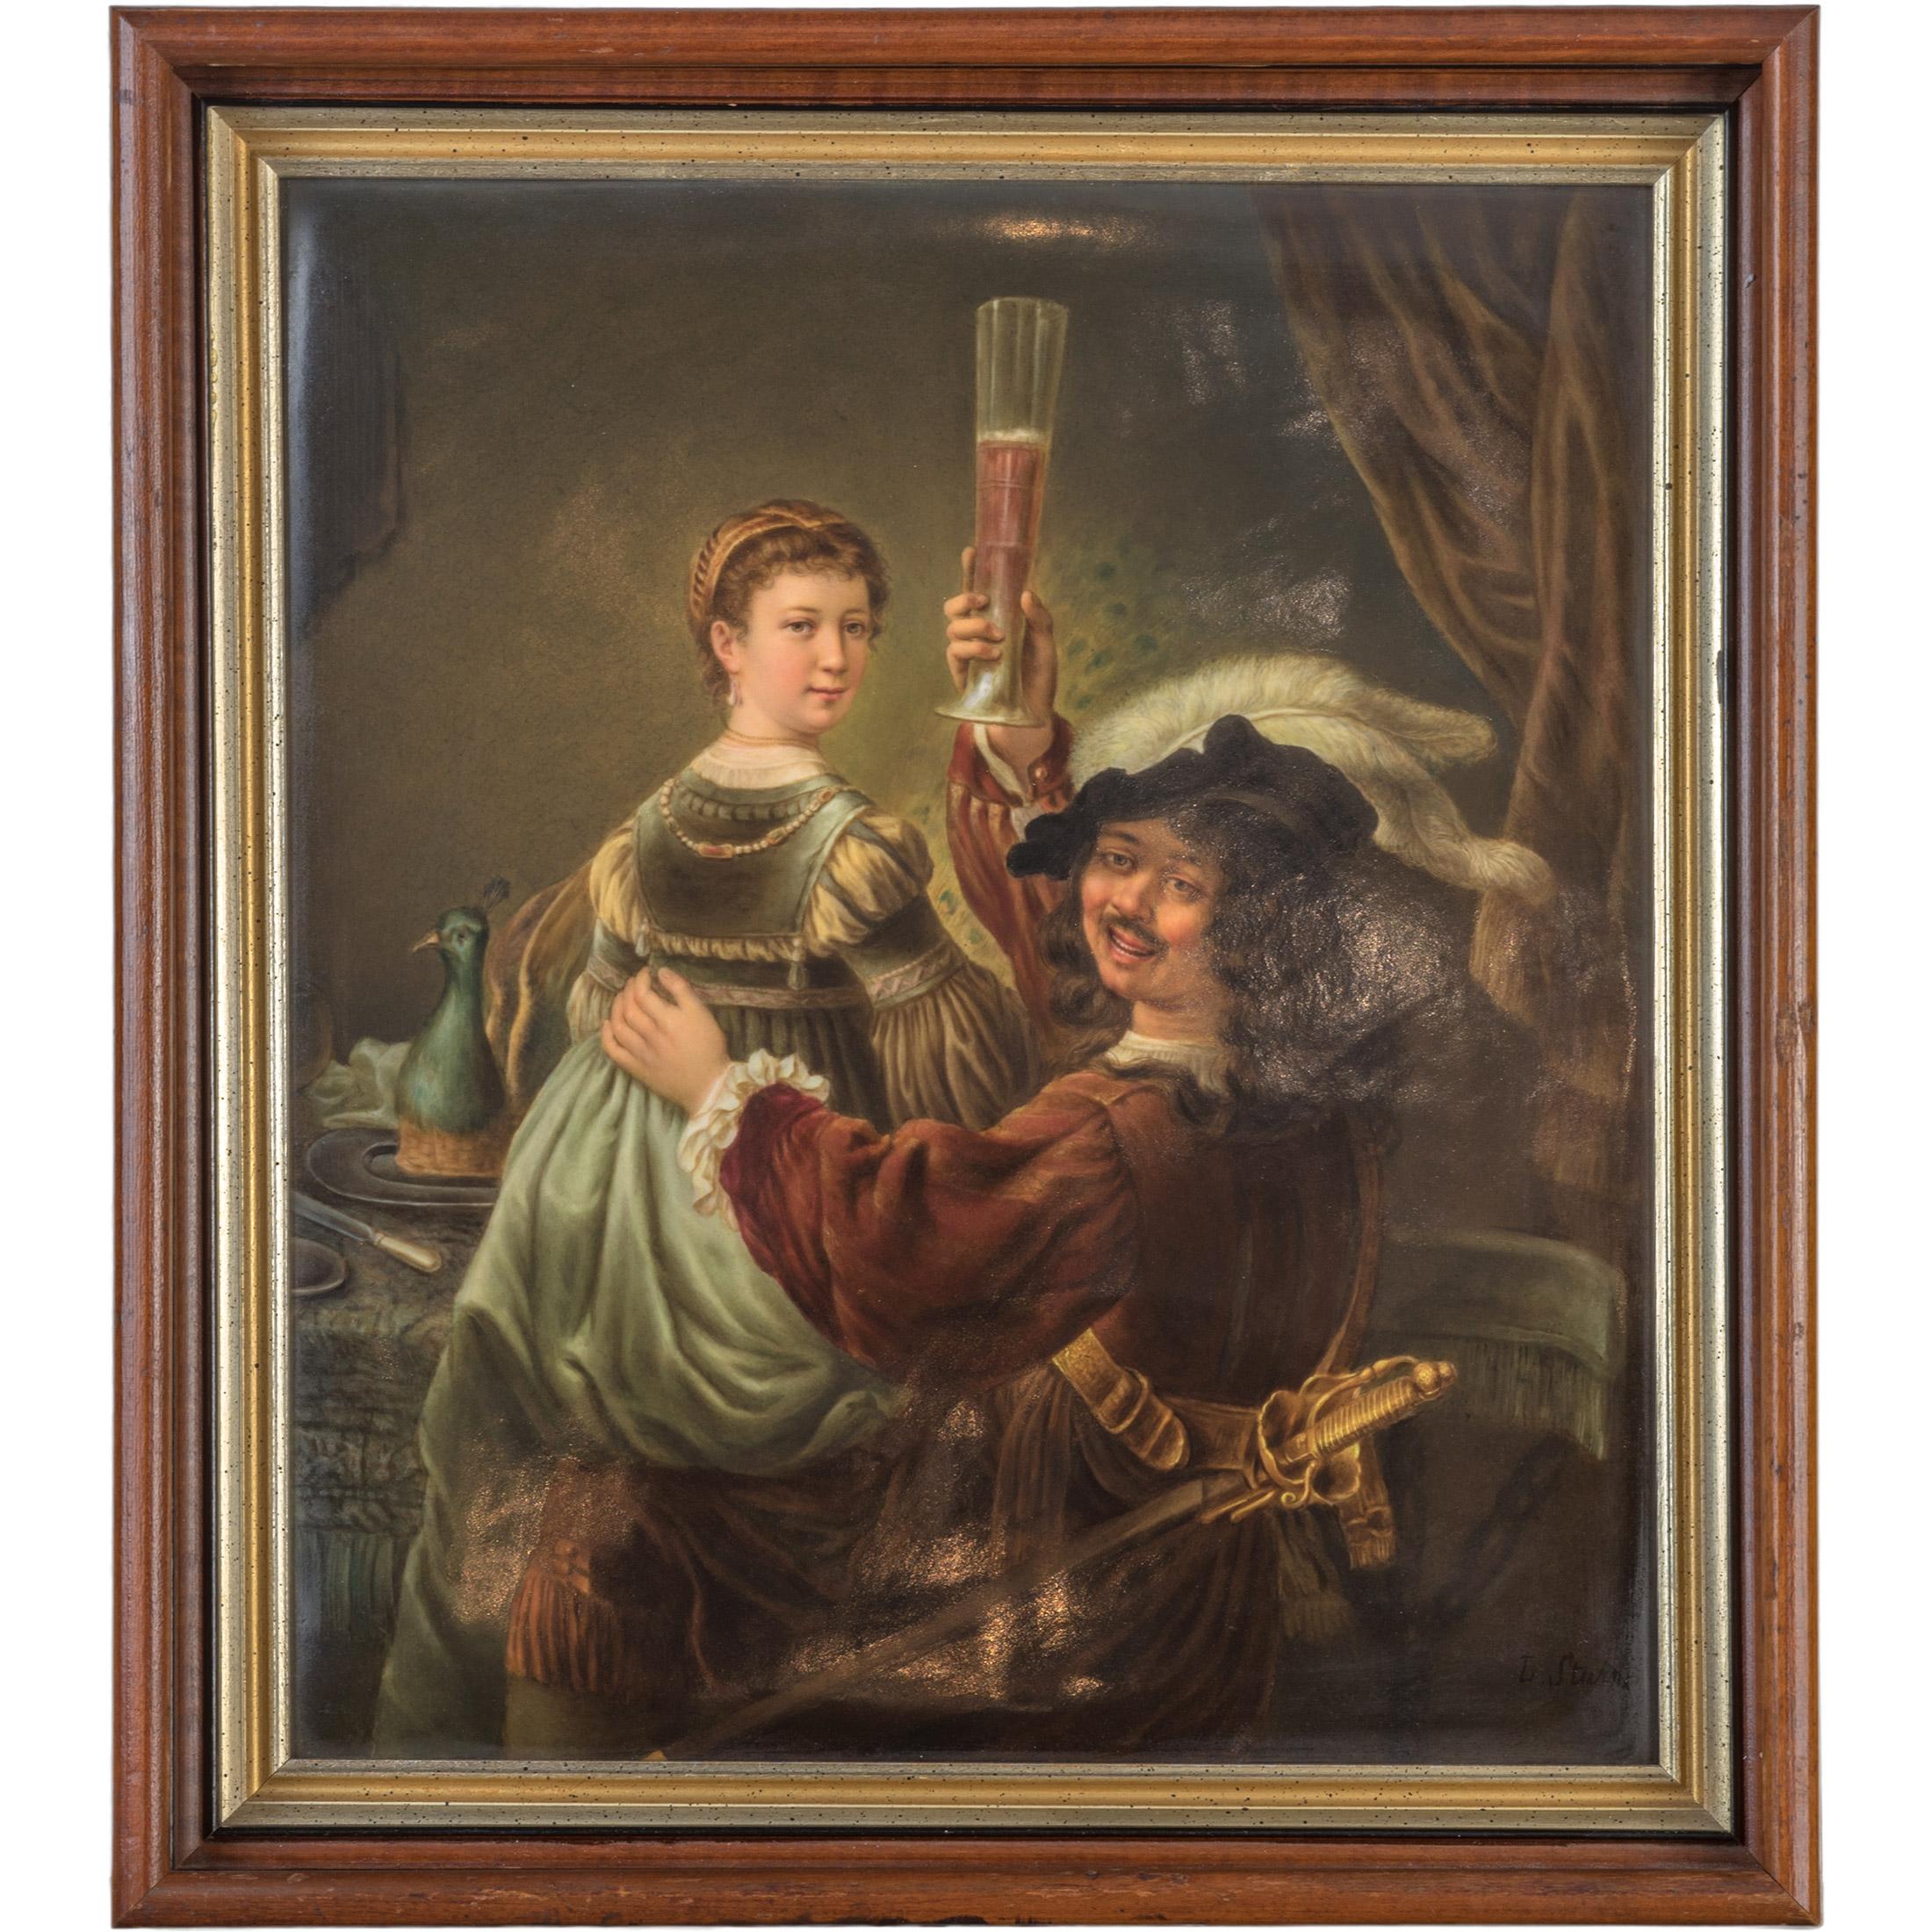 Large KPM Porcelain Plaque depicting Rembrandt and his wife in the scene of the Prodigal Son in the tavern stamped KPM on the reverse15 1/2 x 13 1/2 inches.